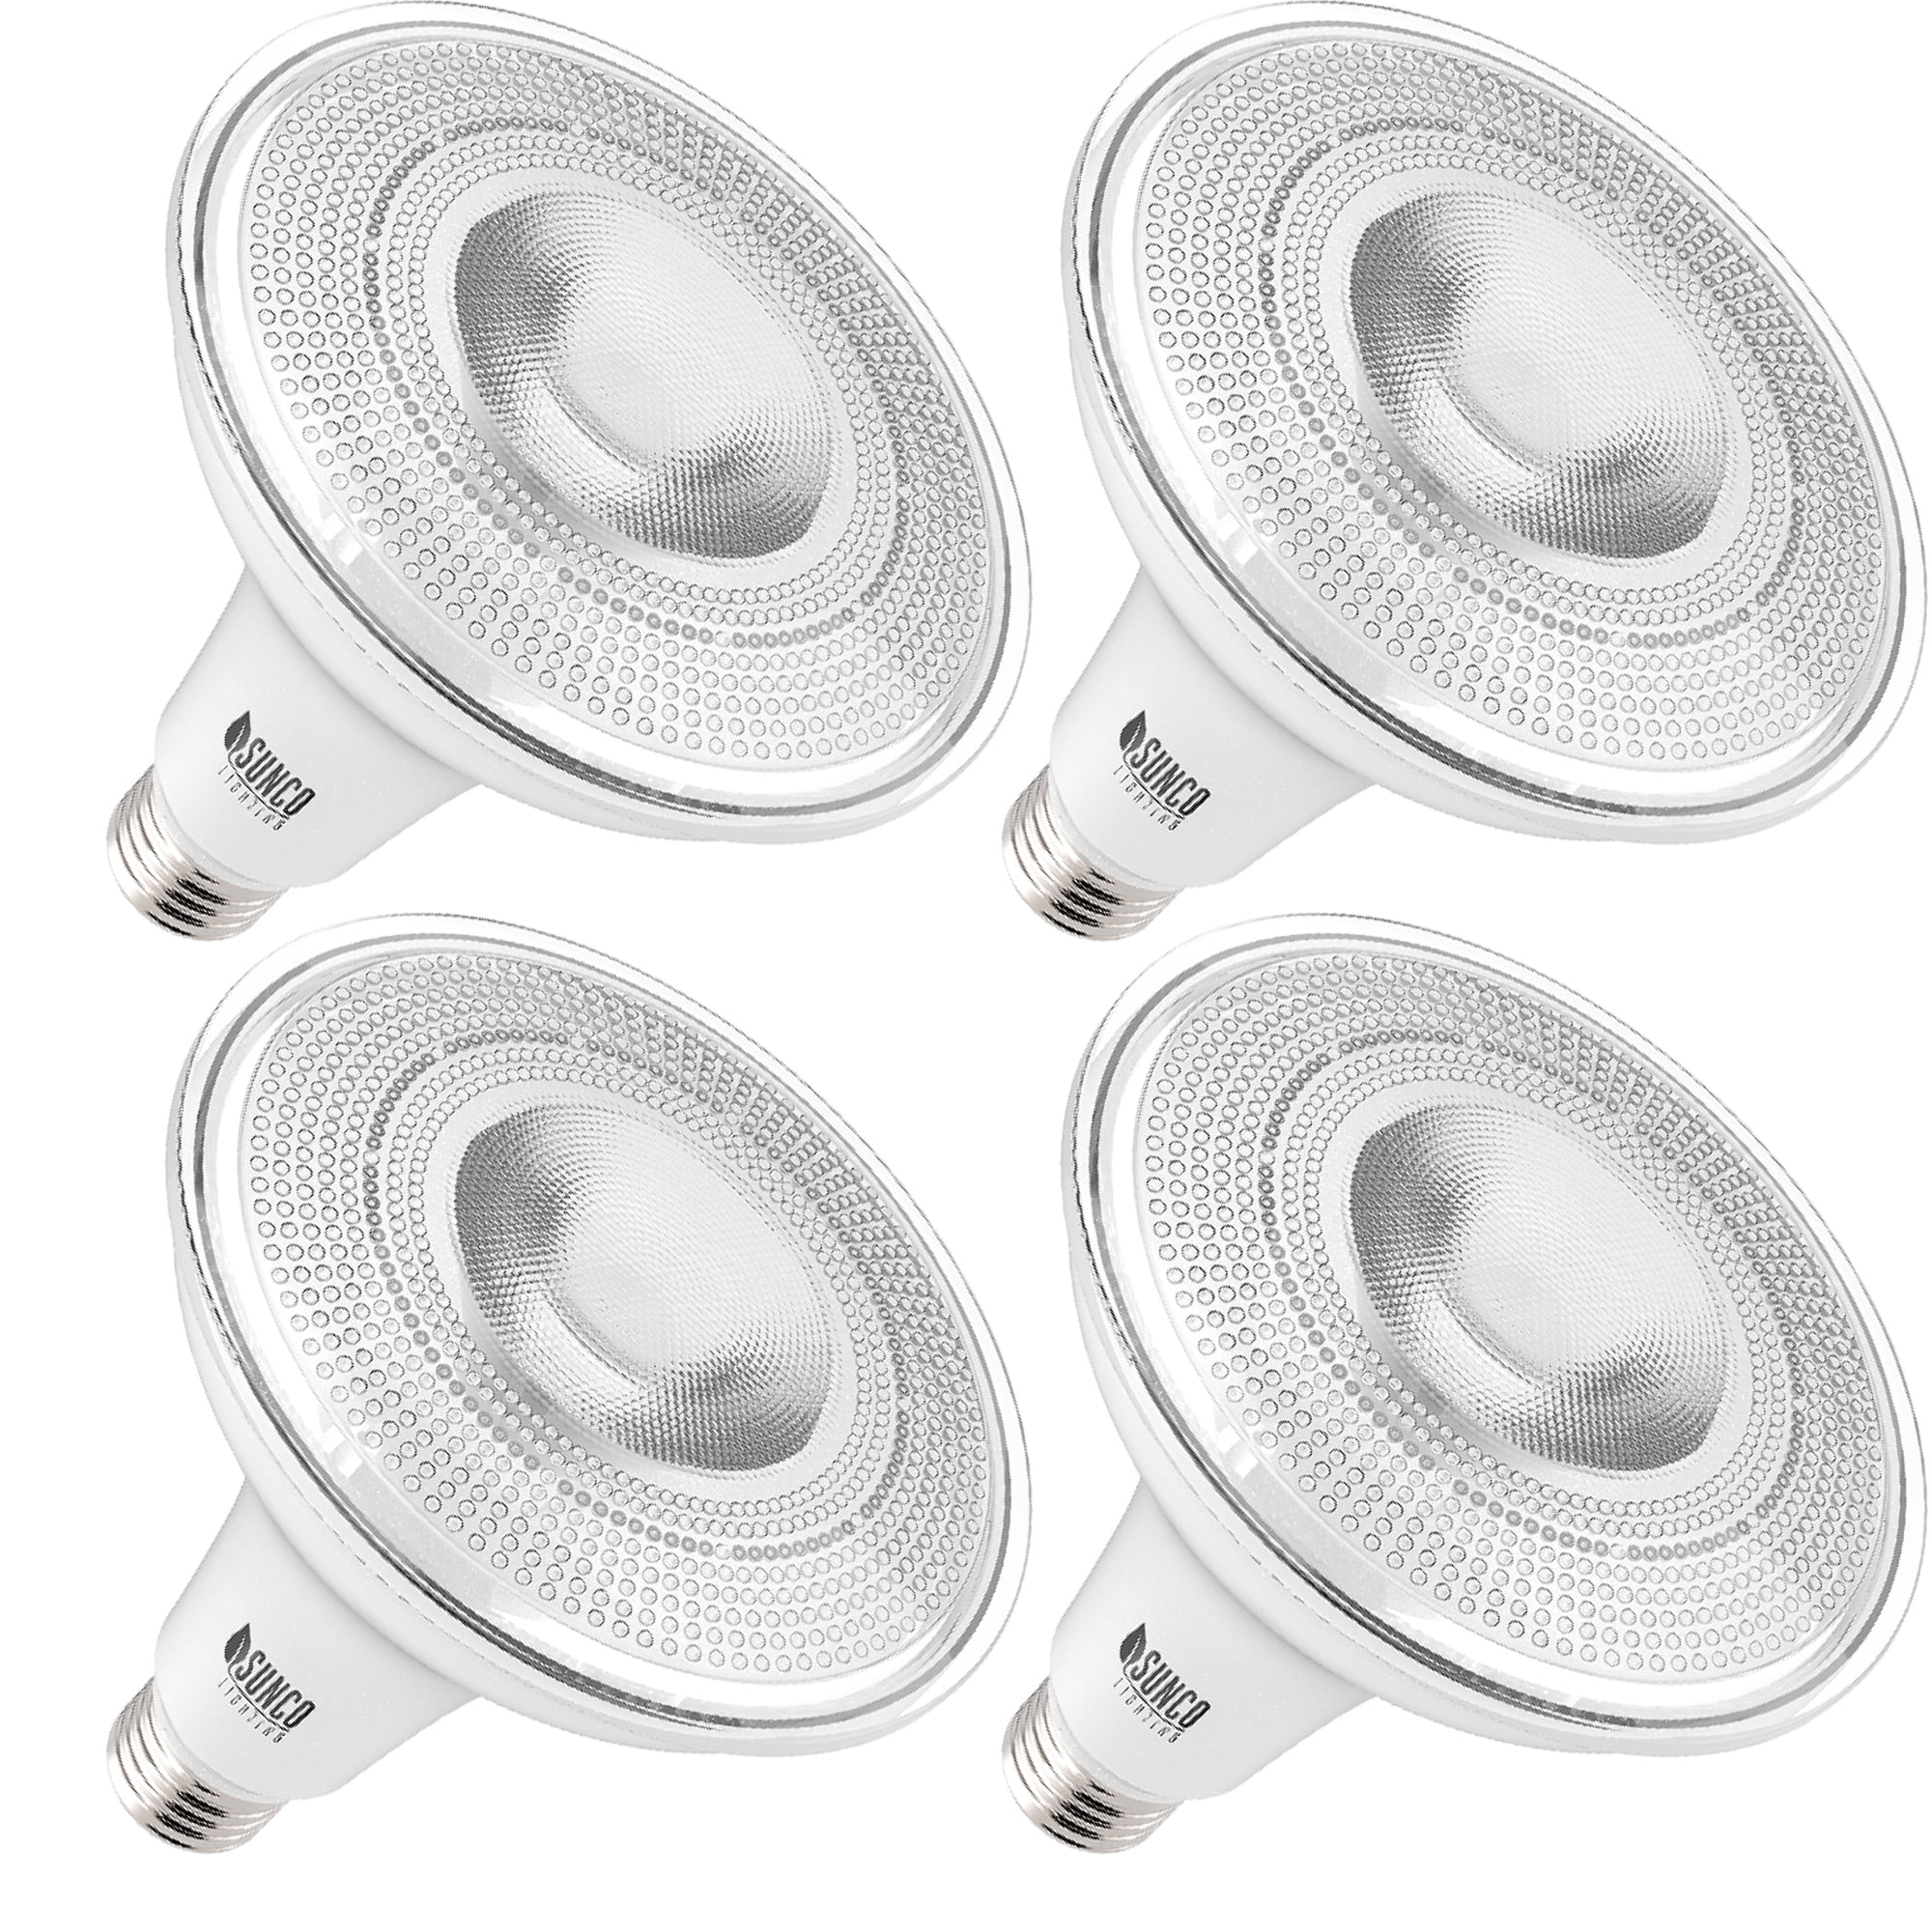 4000K Cool White E26 Base 13W=100W Waterproof Dimmable Sunco Lighting 6 Pack PAR38 LED Bulb UL & Energy Star 1050 LM Indoor/Outdoor Spotlight